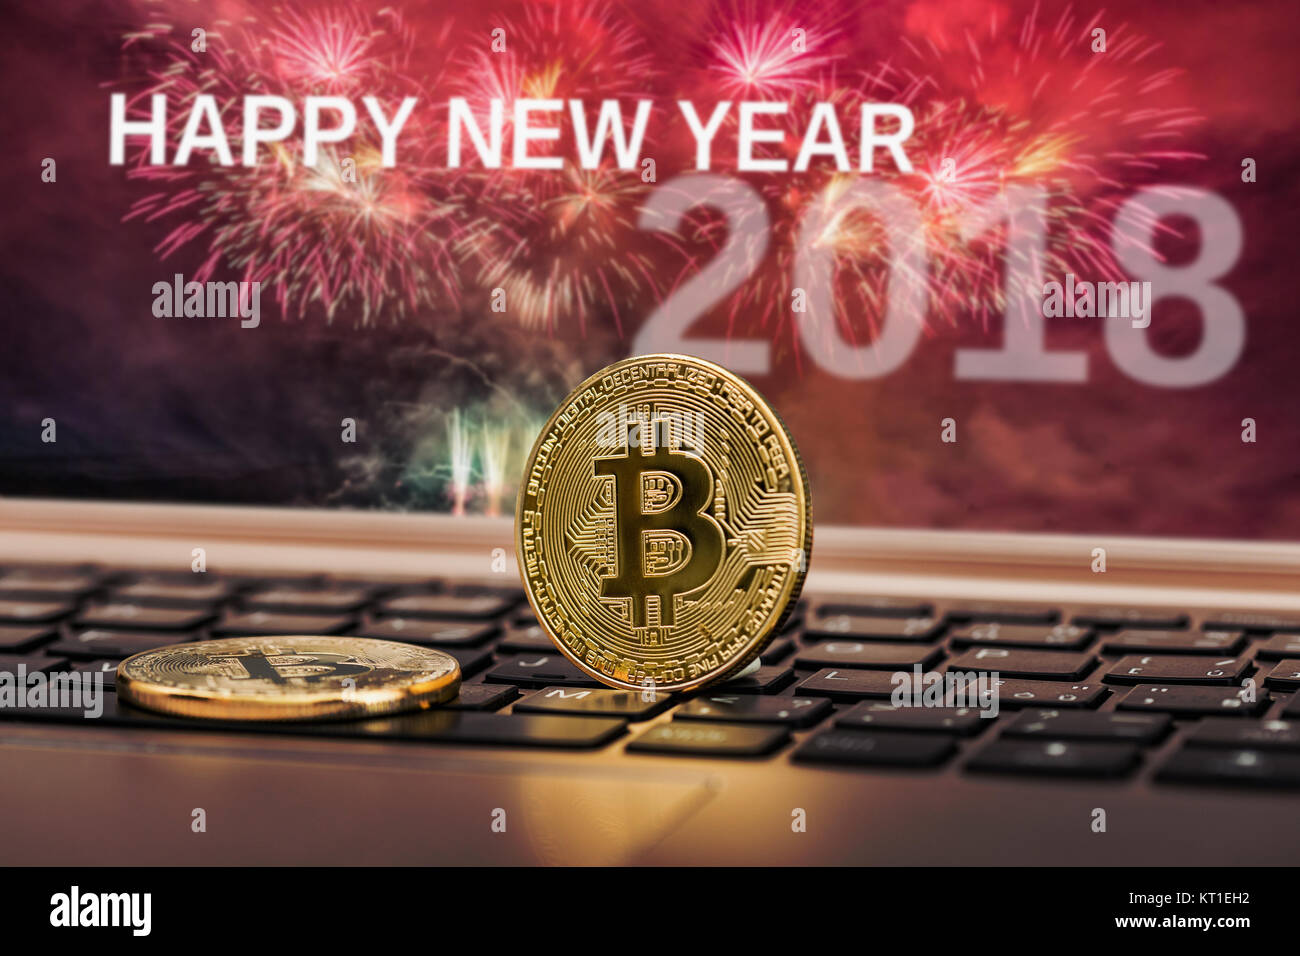 Happy new year 2018 with fireworks background. Celebration New Year 2018, Golden bitcoin coin on the black laptop keyboard. Macro. Stock Photo